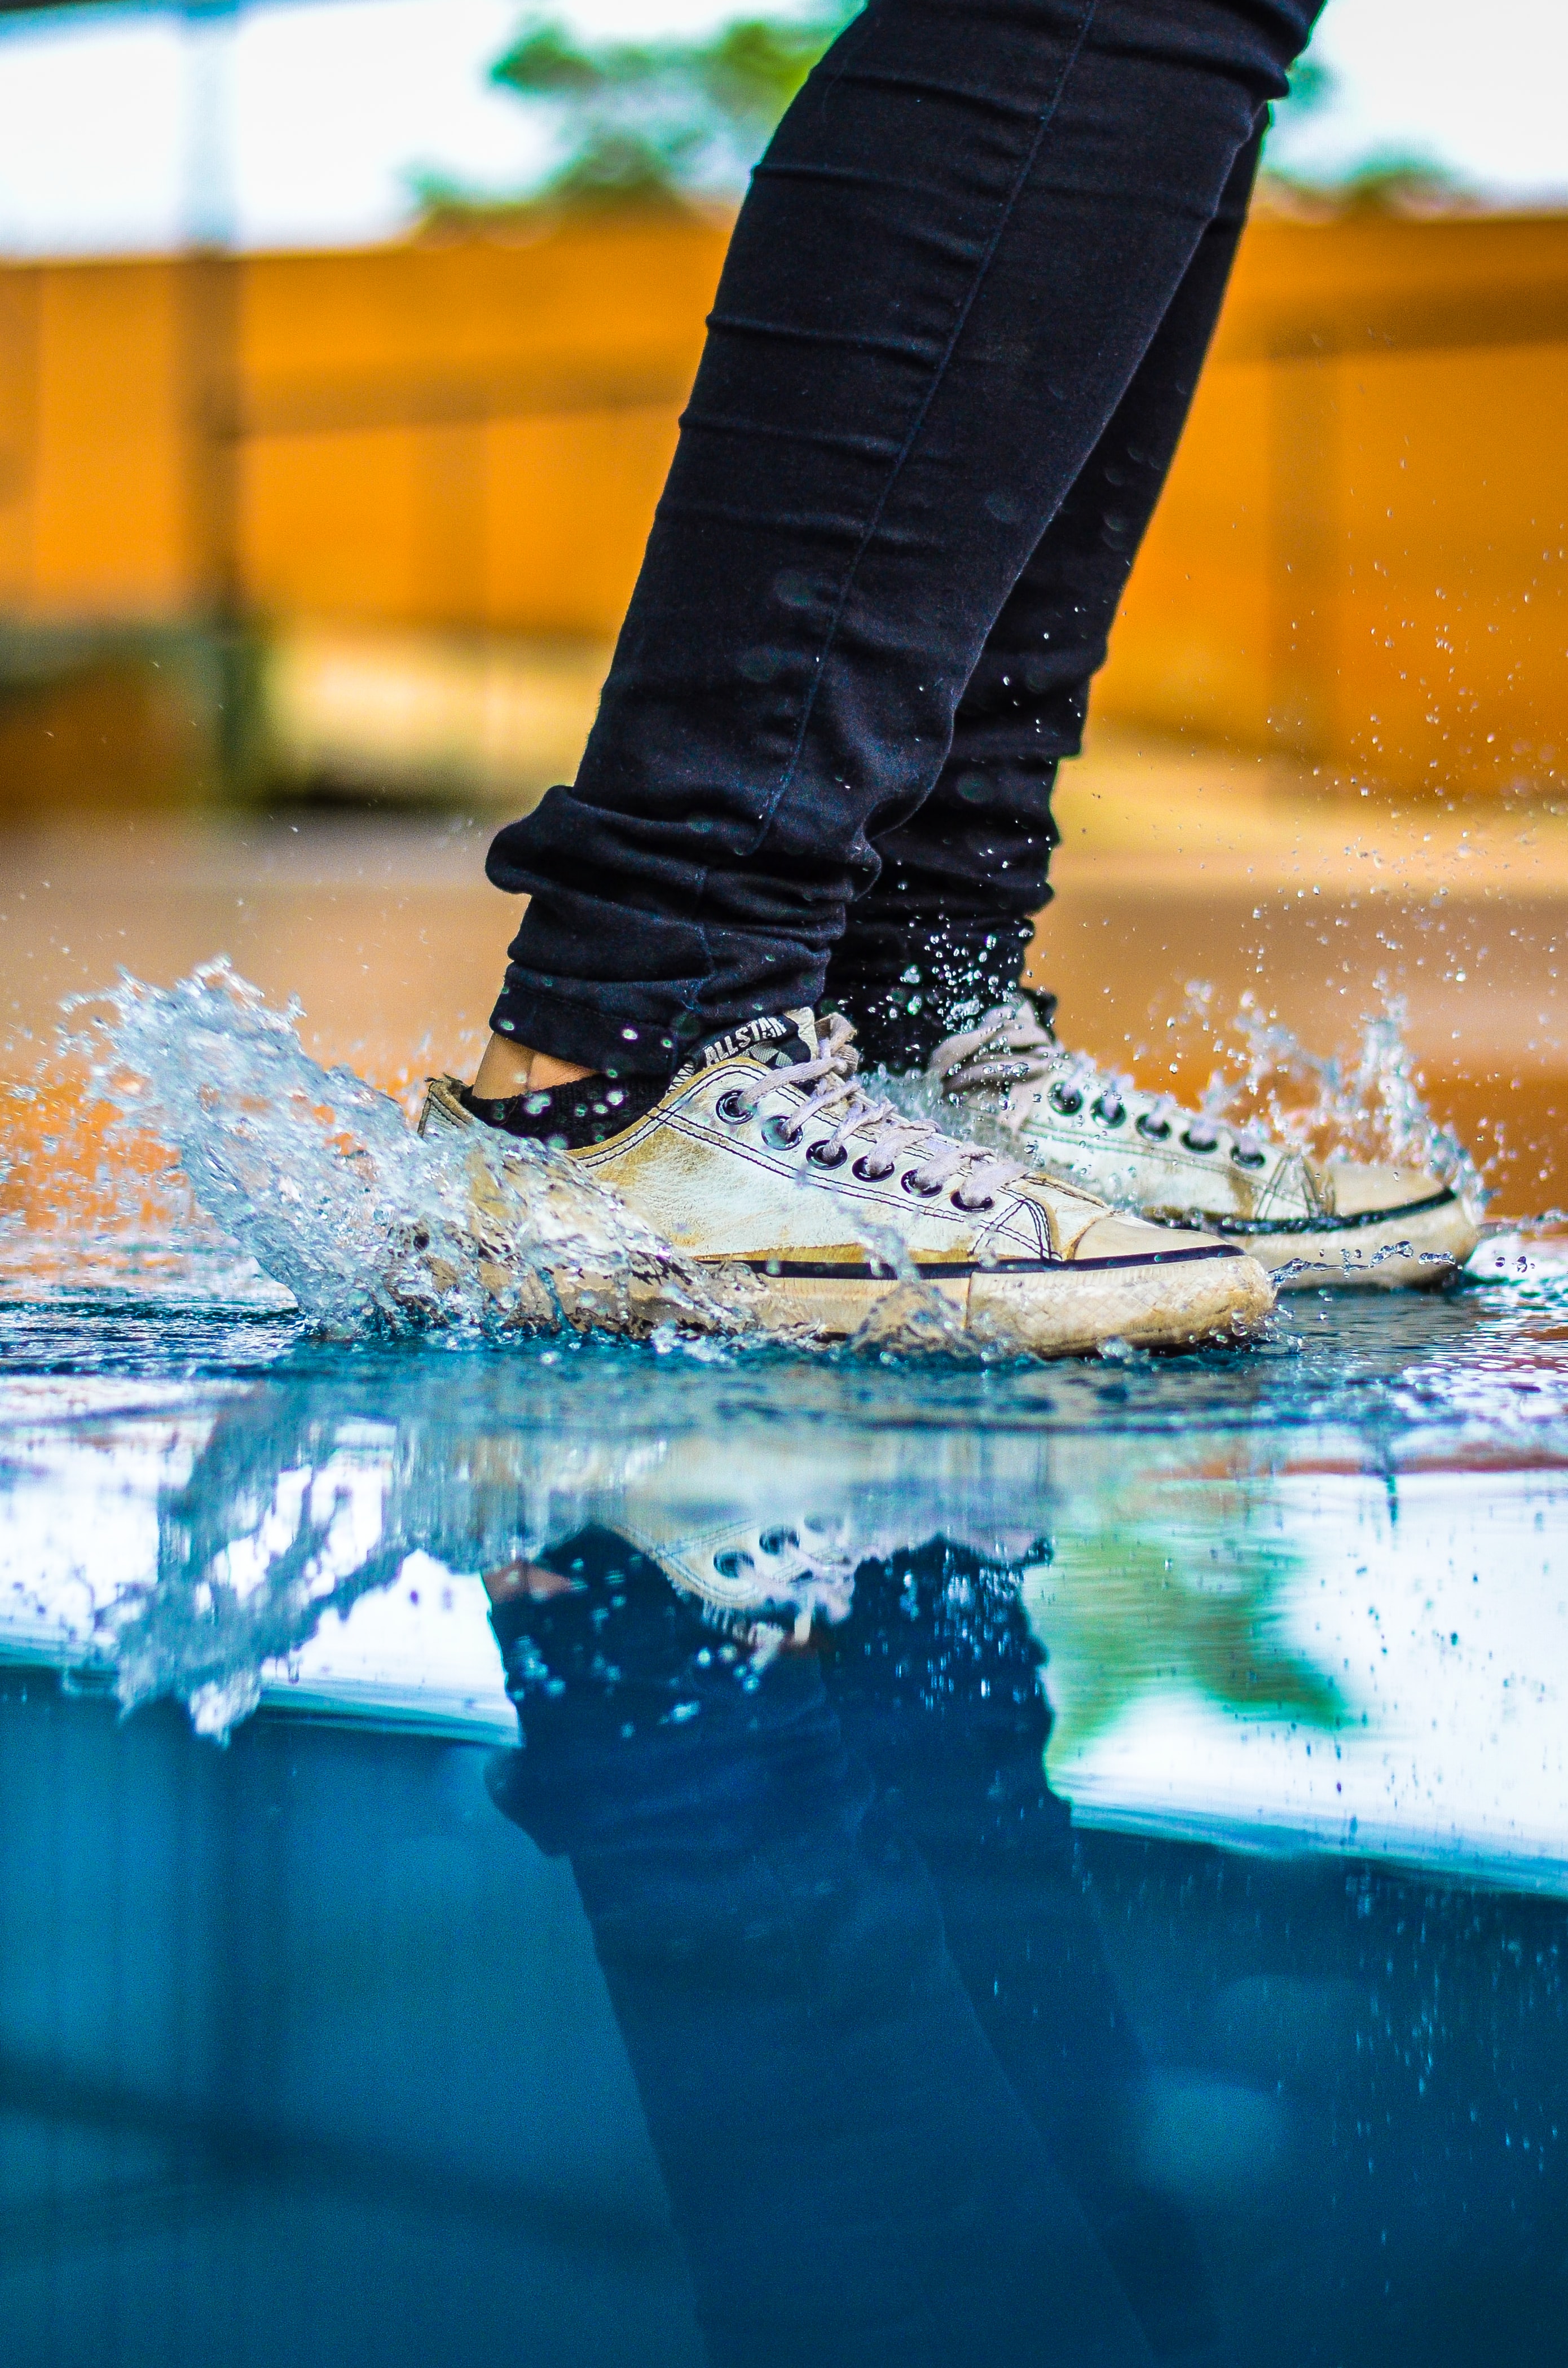 Feet jumping in puddle